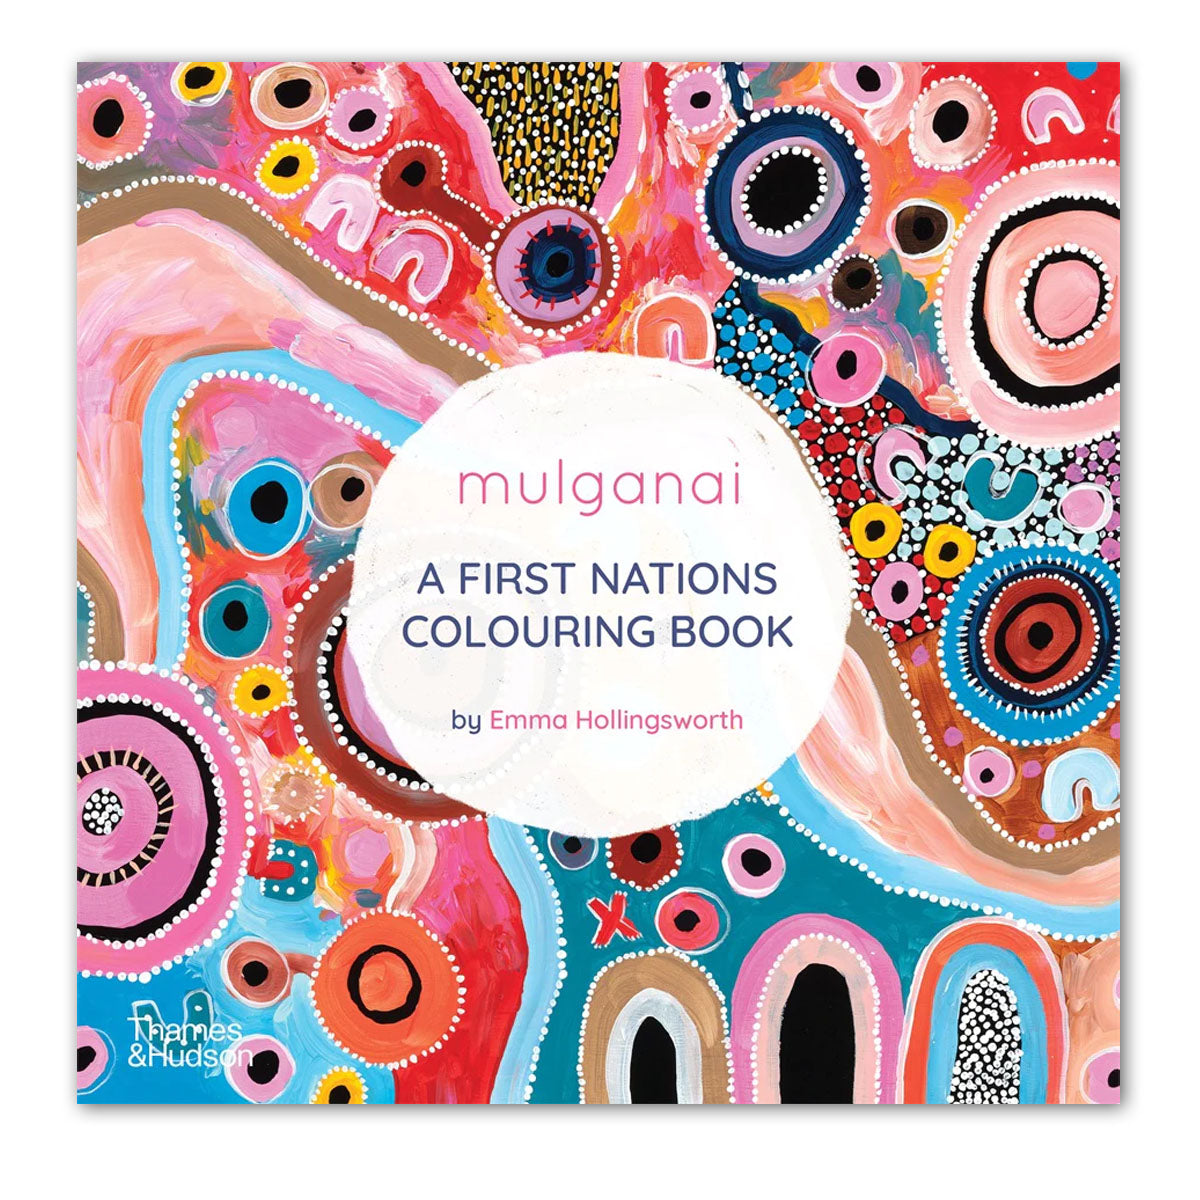 Mulganai - A First Nations Colouring Book